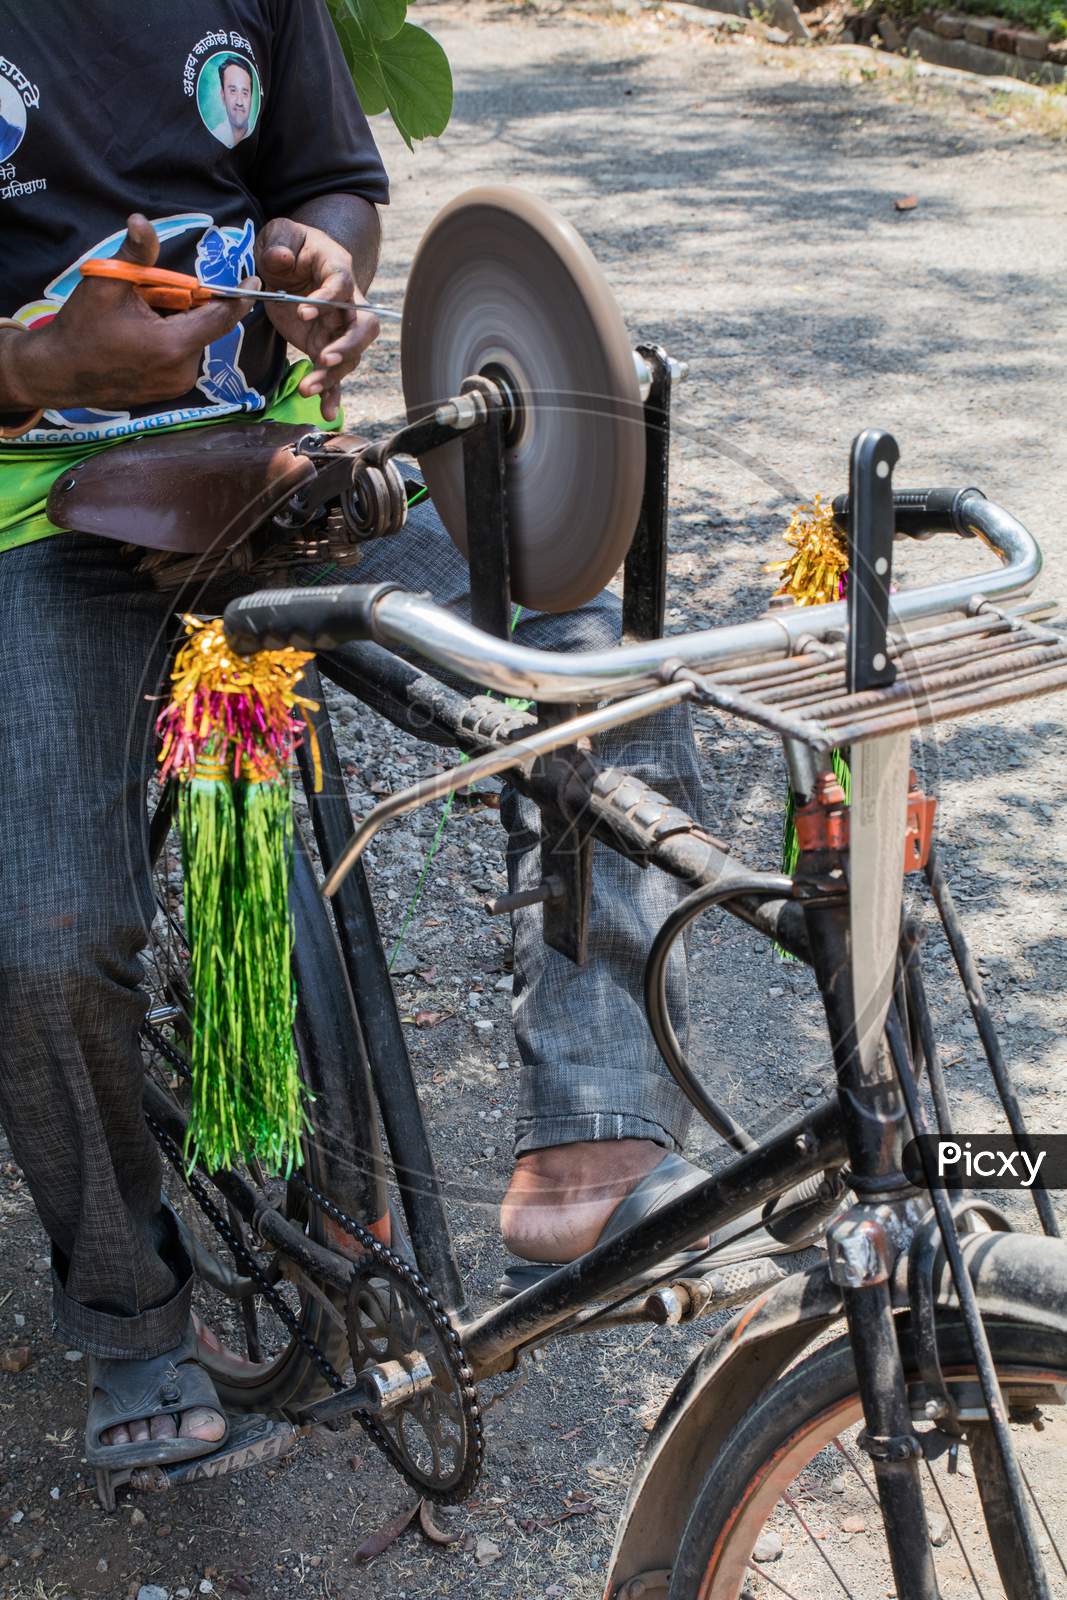 View Of A Guy Sharpening Tools On His Bicycle